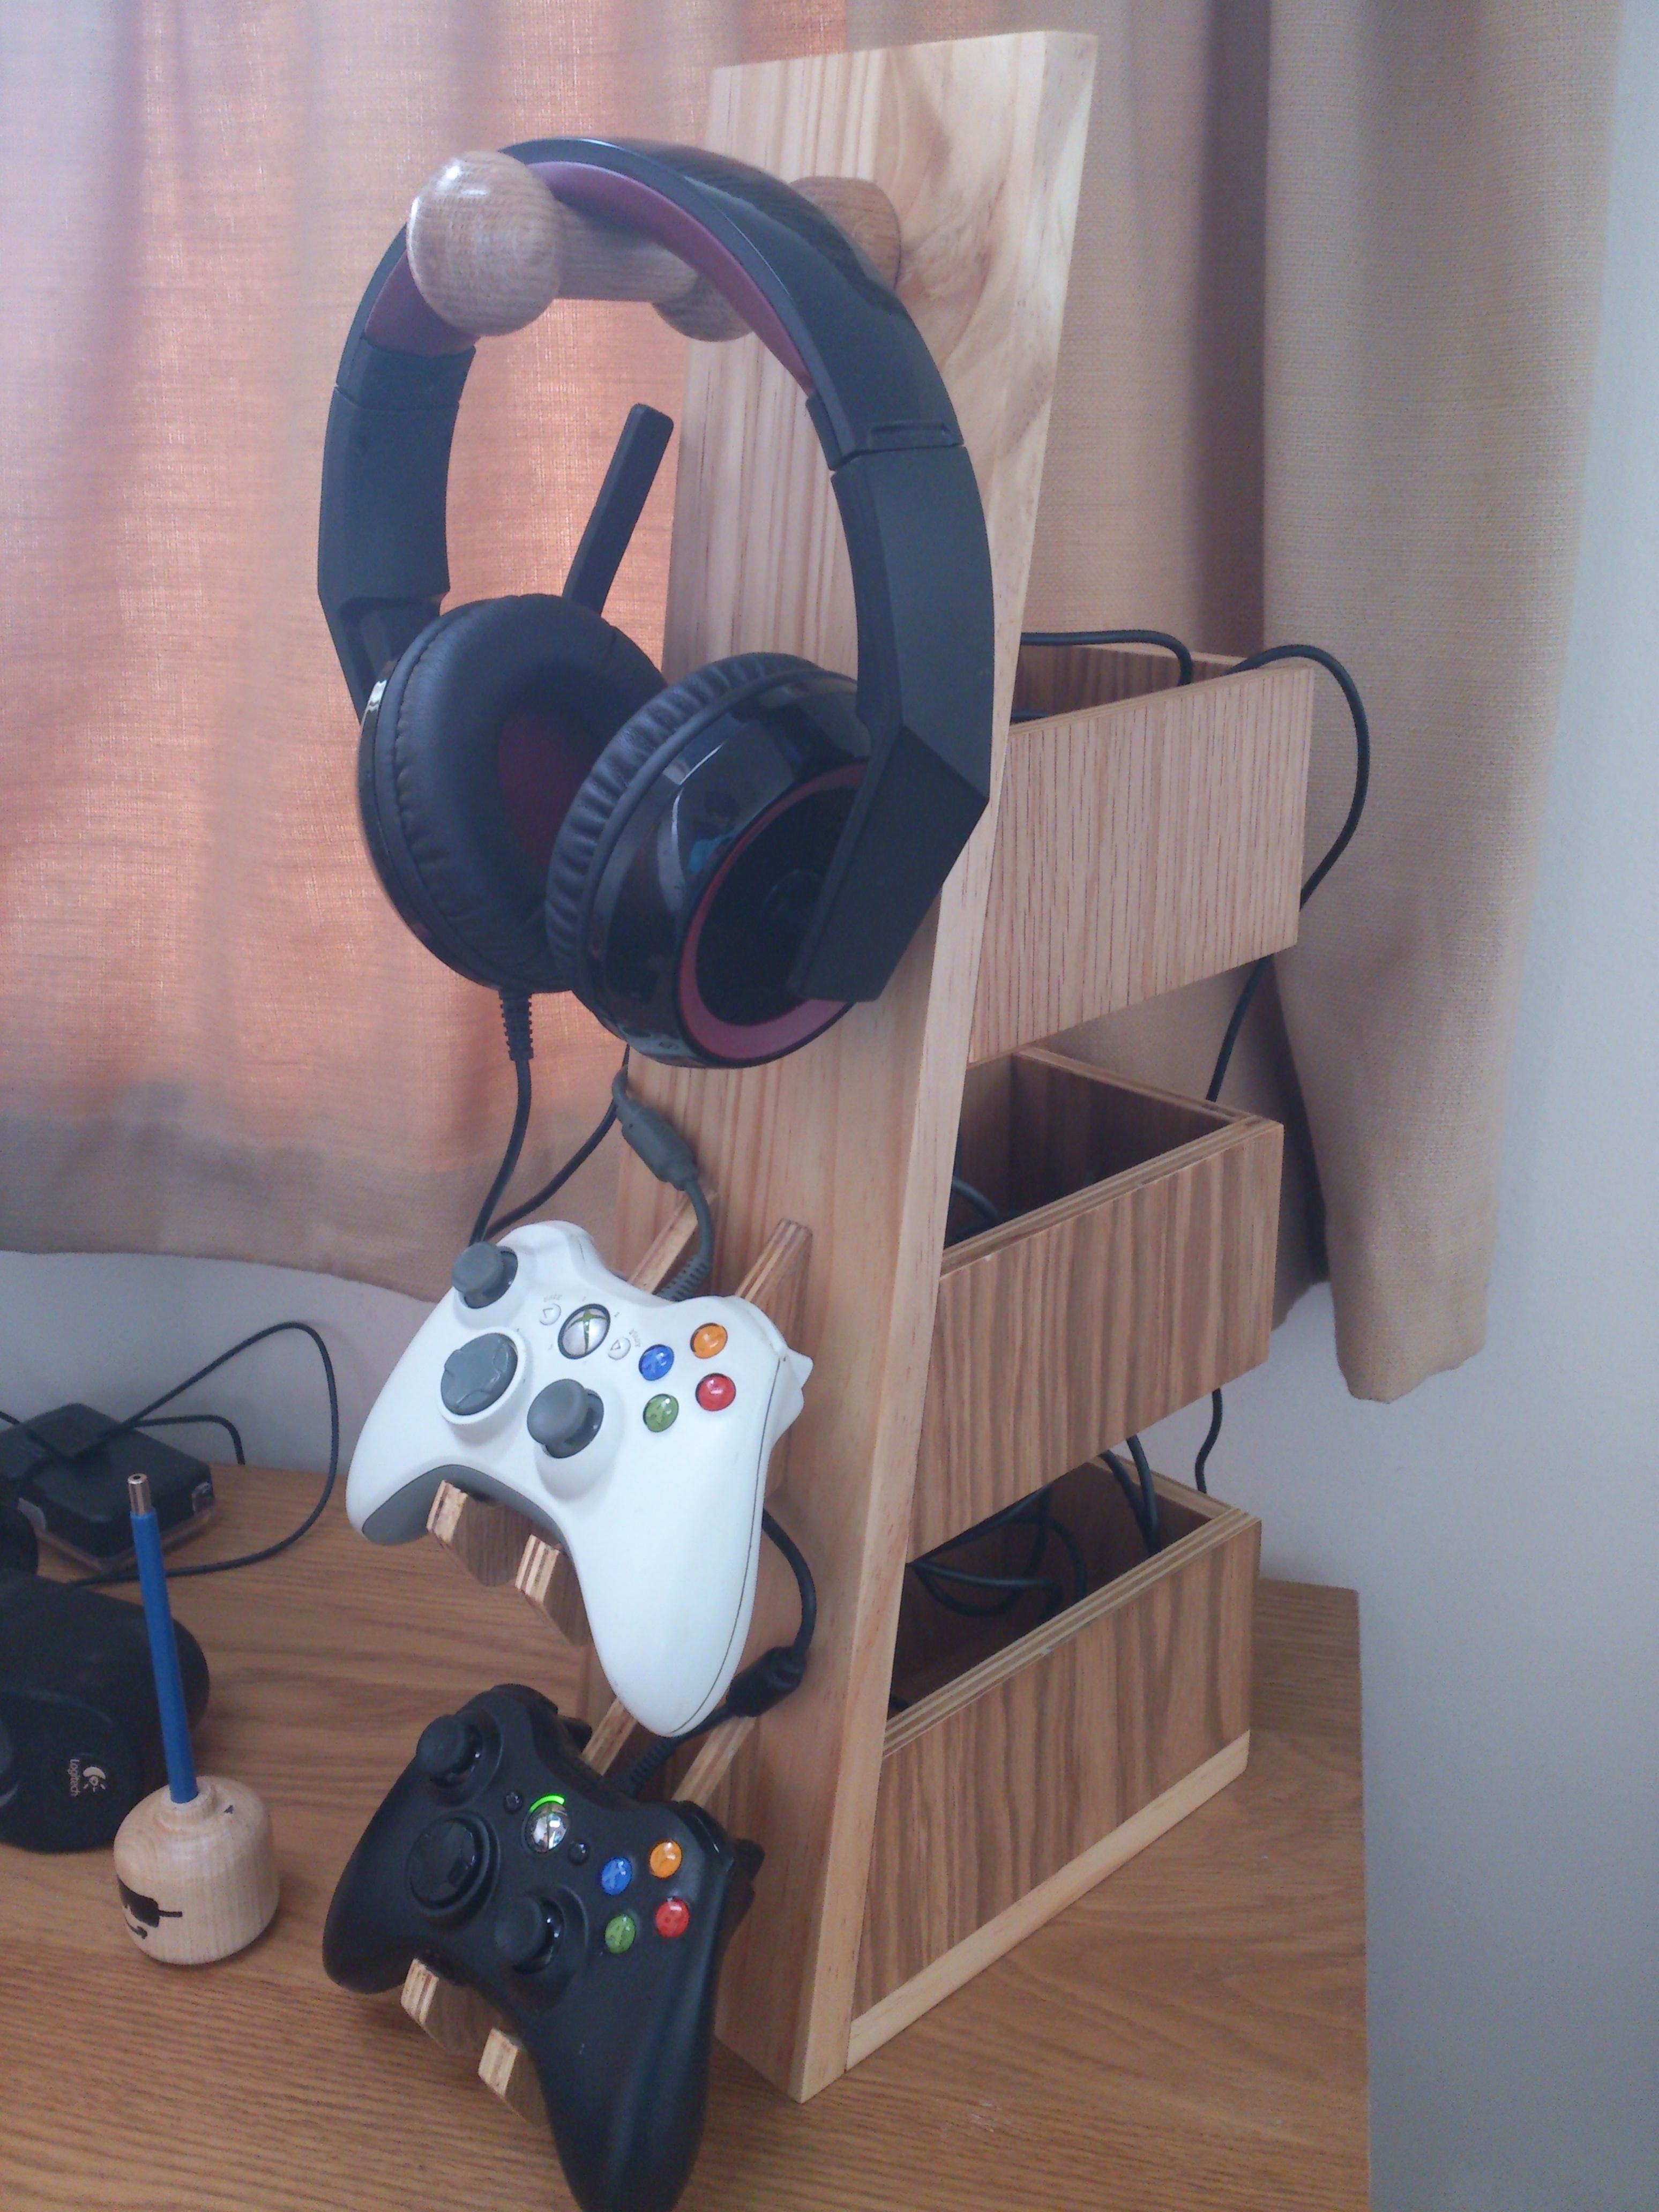 Best ideas about DIY Controller Rack
. Save or Pin The making of a headset and controller rack Now.